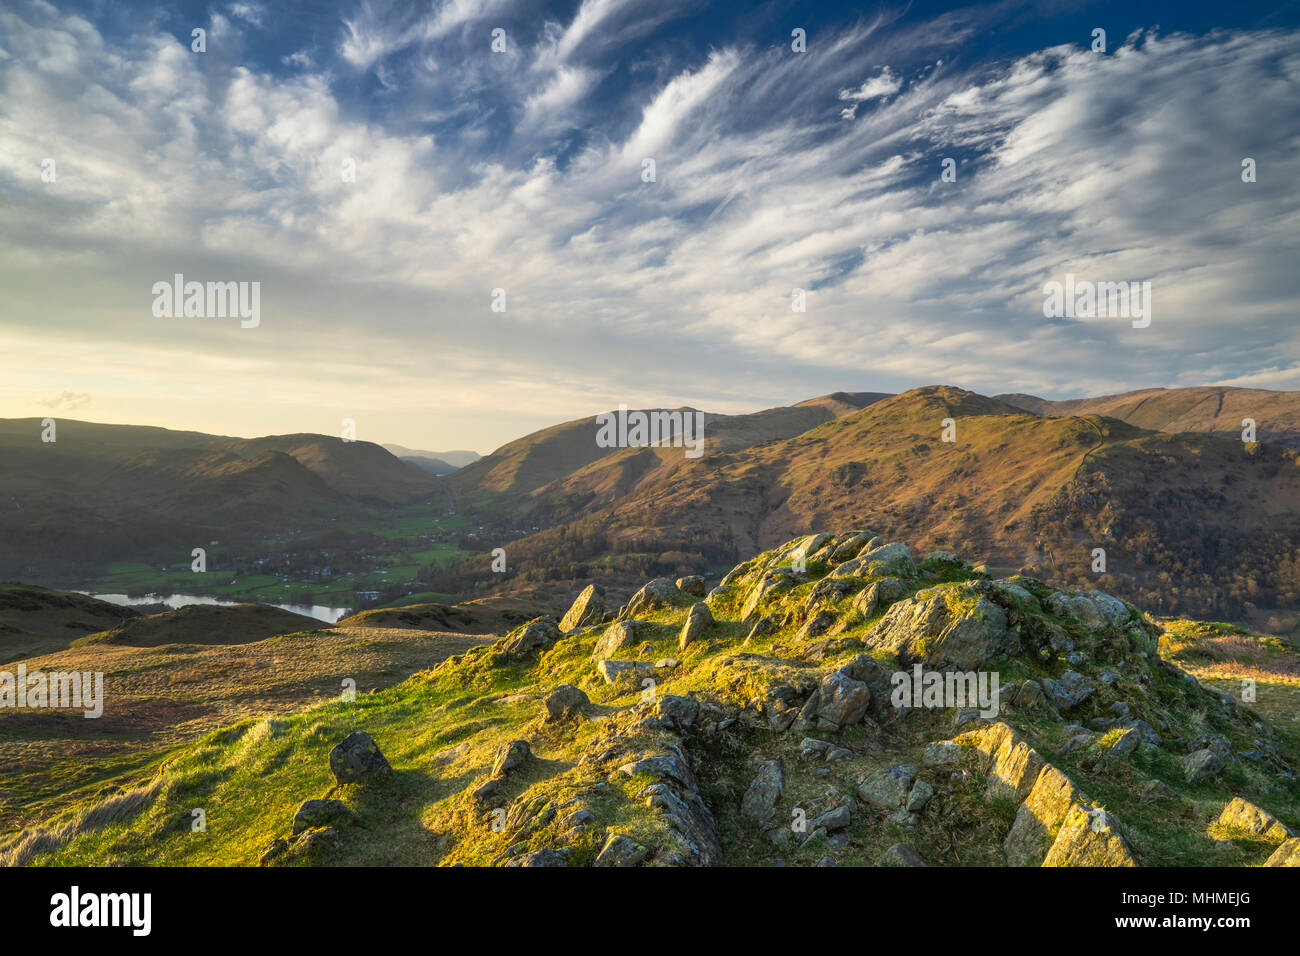 The summit of Loughrigg Fell overlooking Grasmere in the Lake District National Park, England Stock Photo